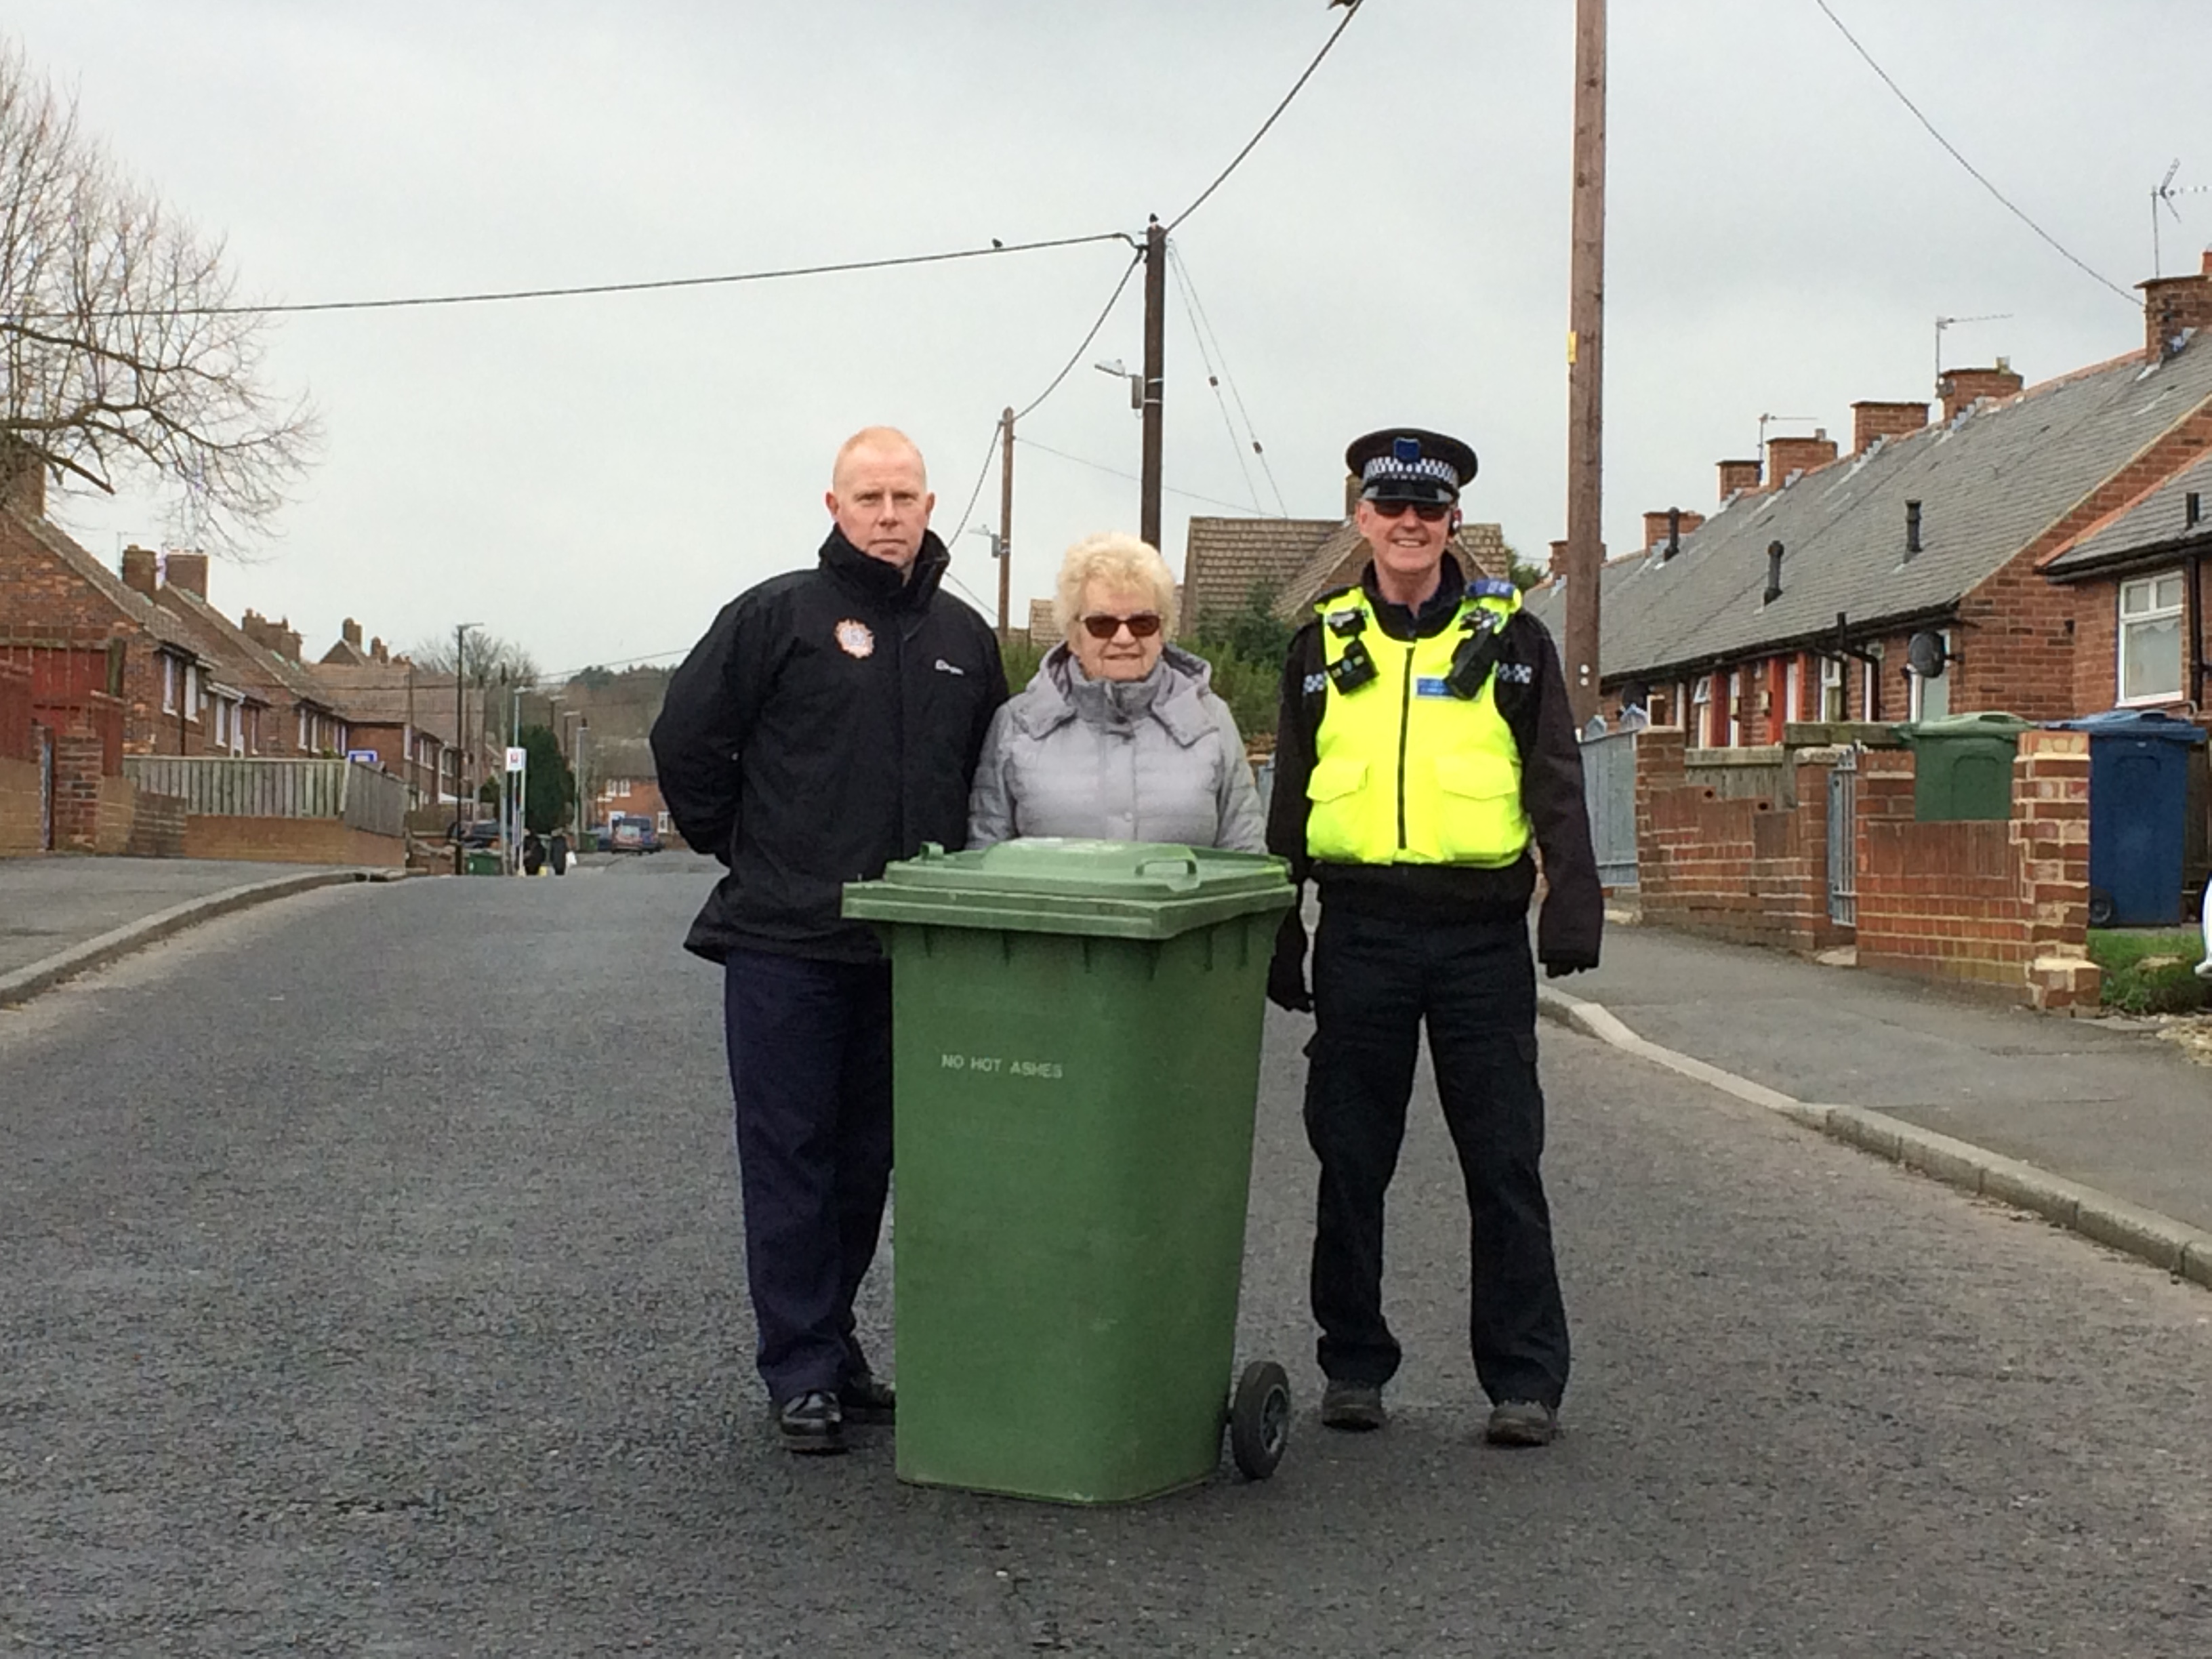 Firefighter councillor and PCSO stand next to a wheelie bin